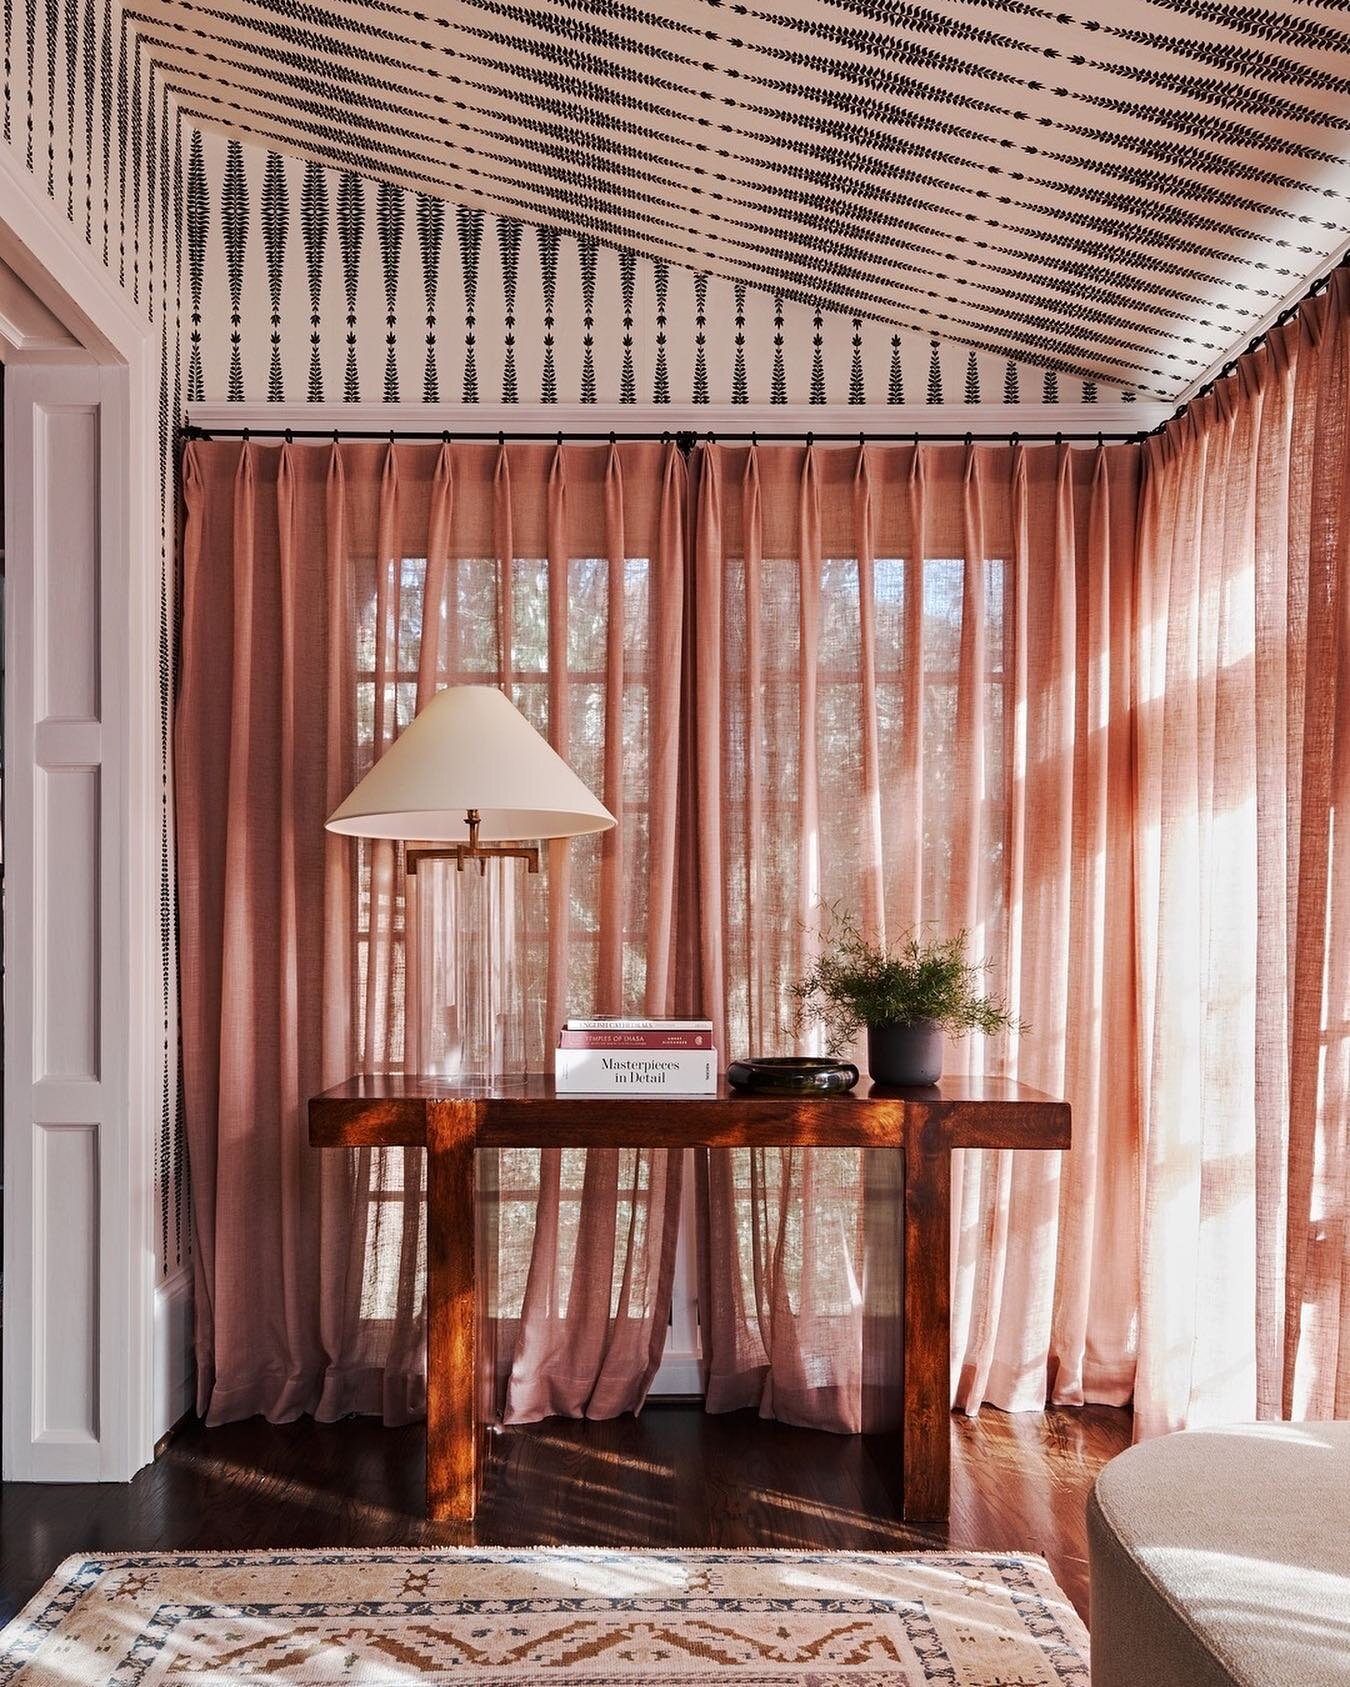 Our Orme Bungalow project is a layer cake of texture and pattern featuring artful wallpaper and rhythmic sheer curtains. Photo by @andrewthomaslee.